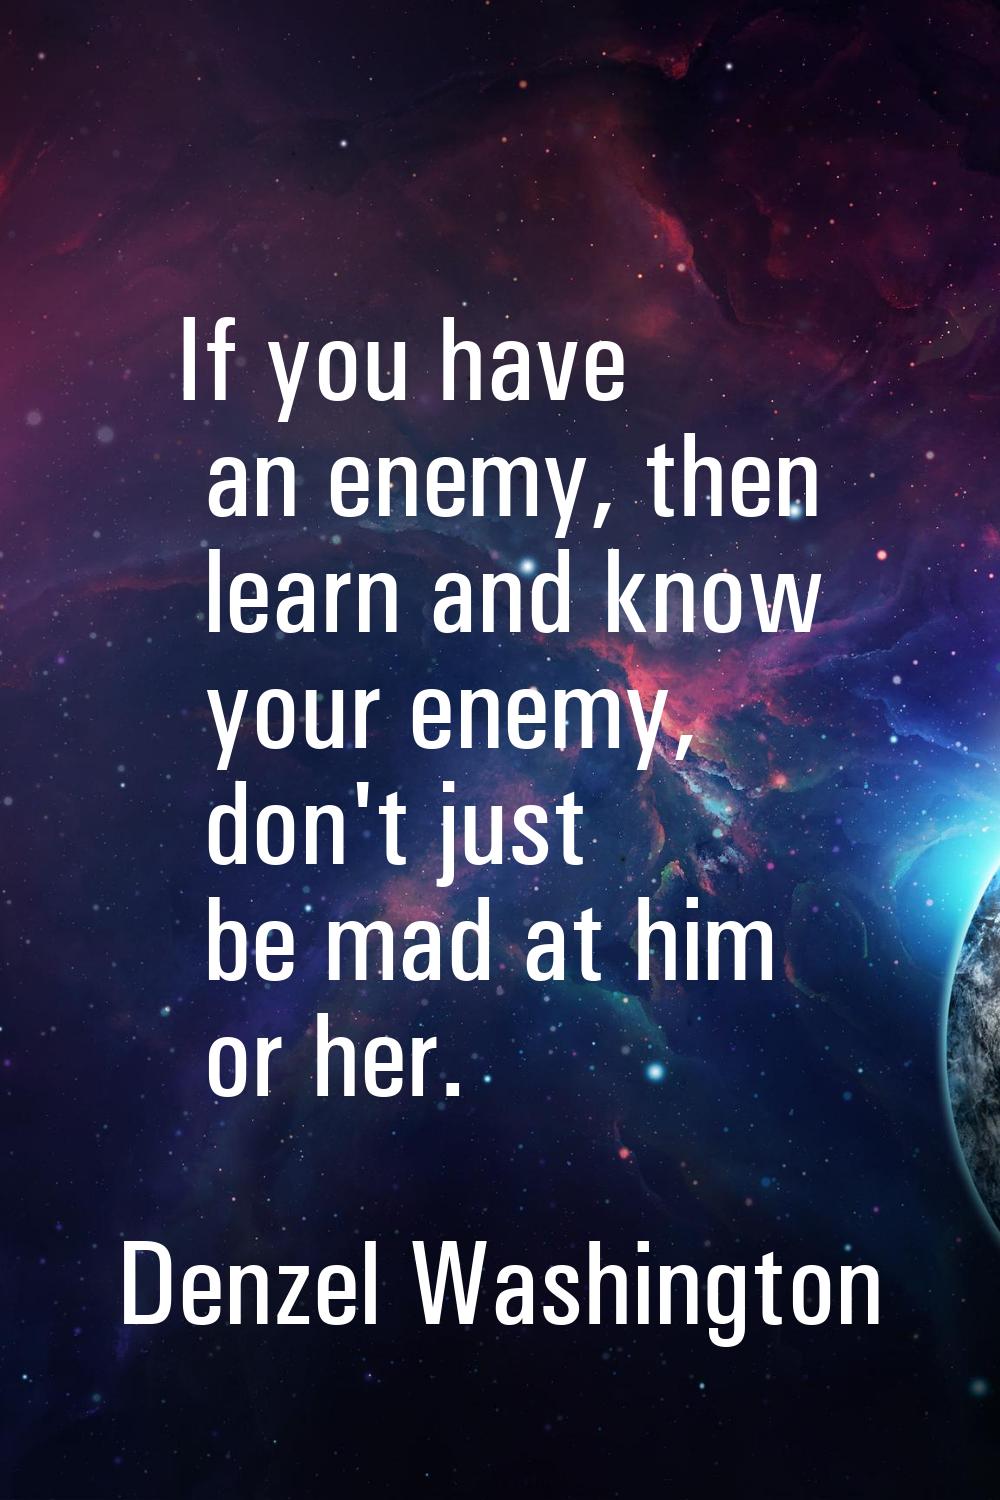 If you have an enemy, then learn and know your enemy, don't just be mad at him or her.